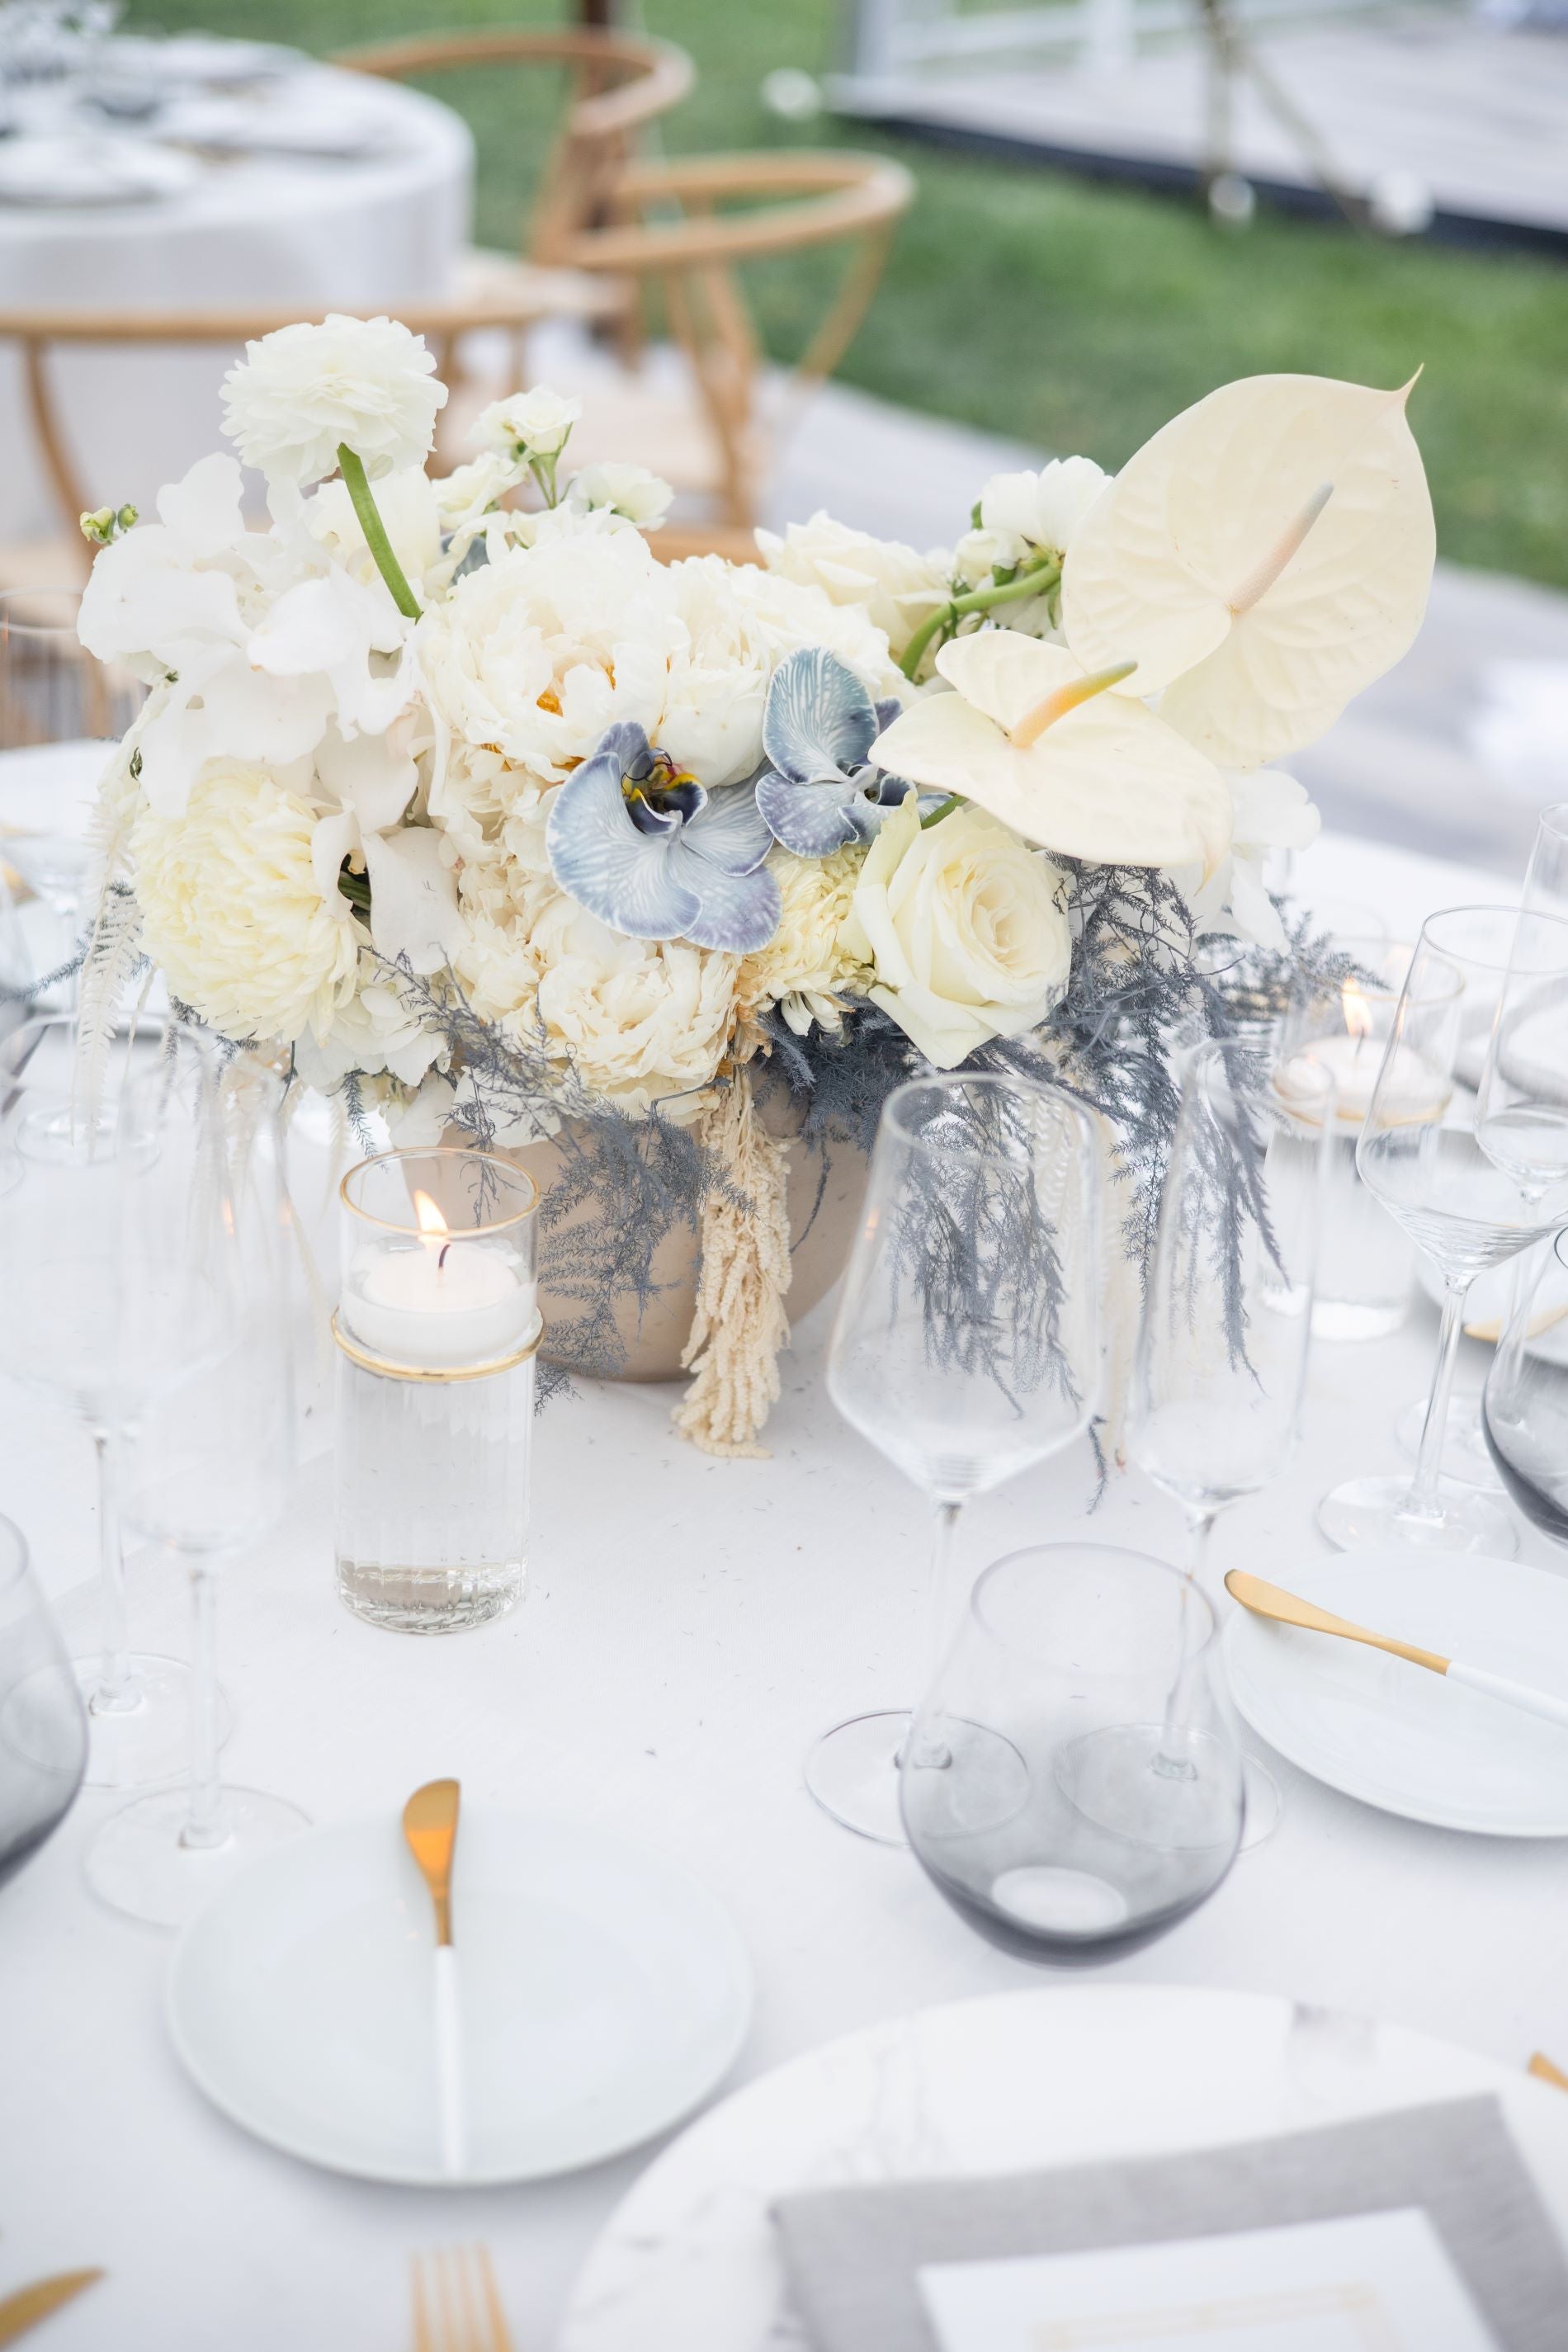 PHOTO BY LOVEWELL PLACE SETTINGS WITH GREY AND WHITE CENTERPIECE